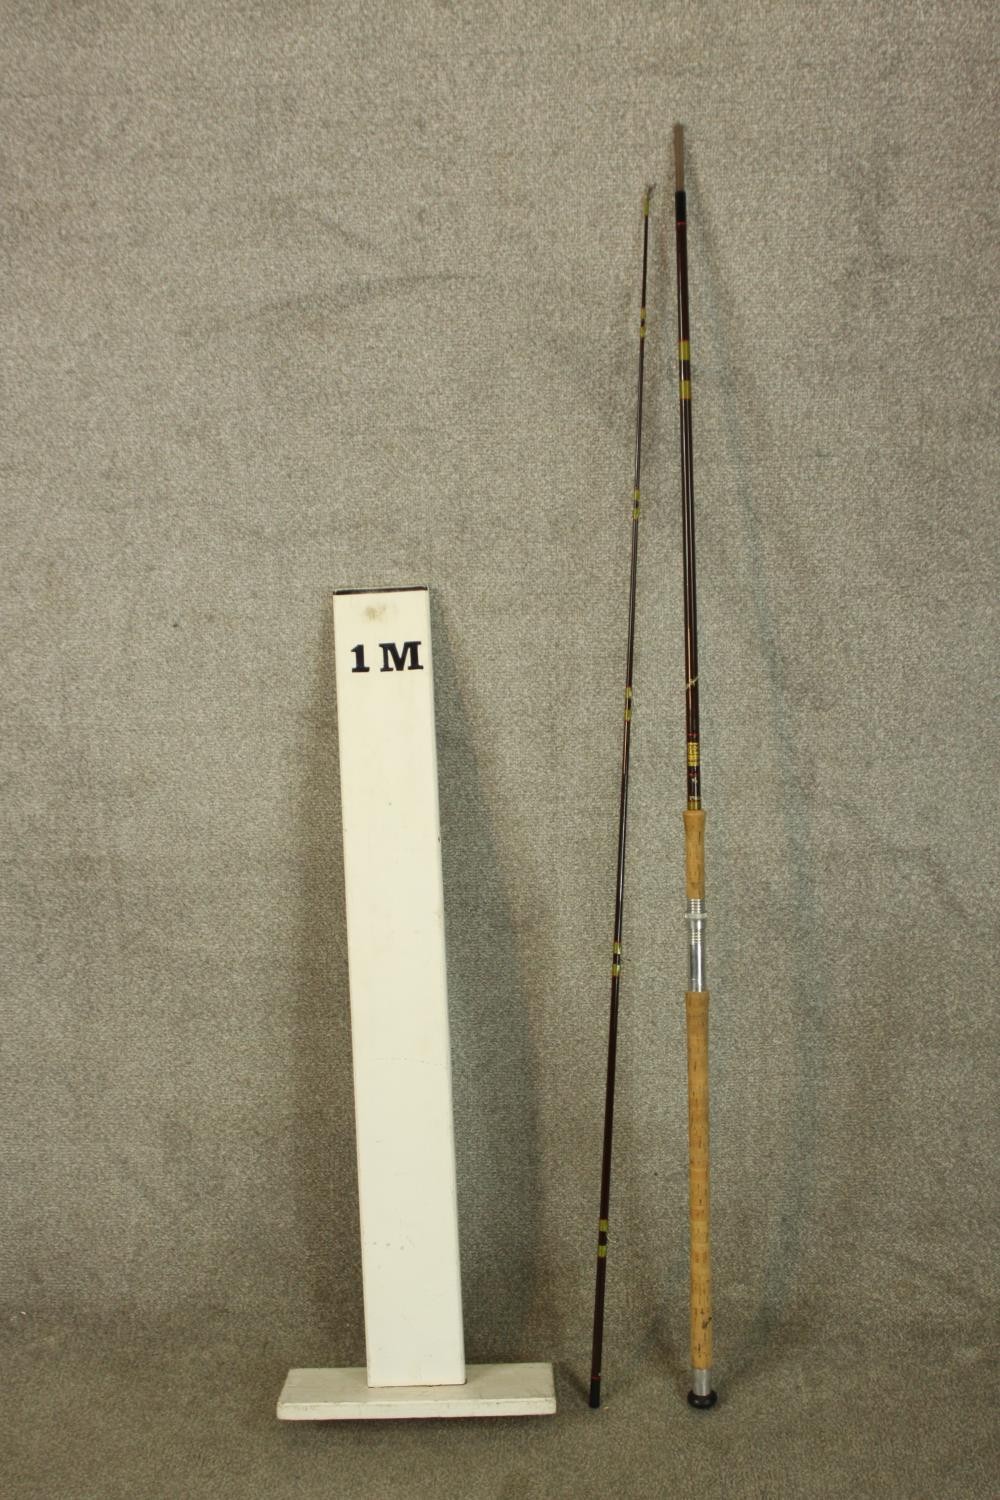 House of Hardy fishing rod. 154 cm in lengh. - Image 2 of 3